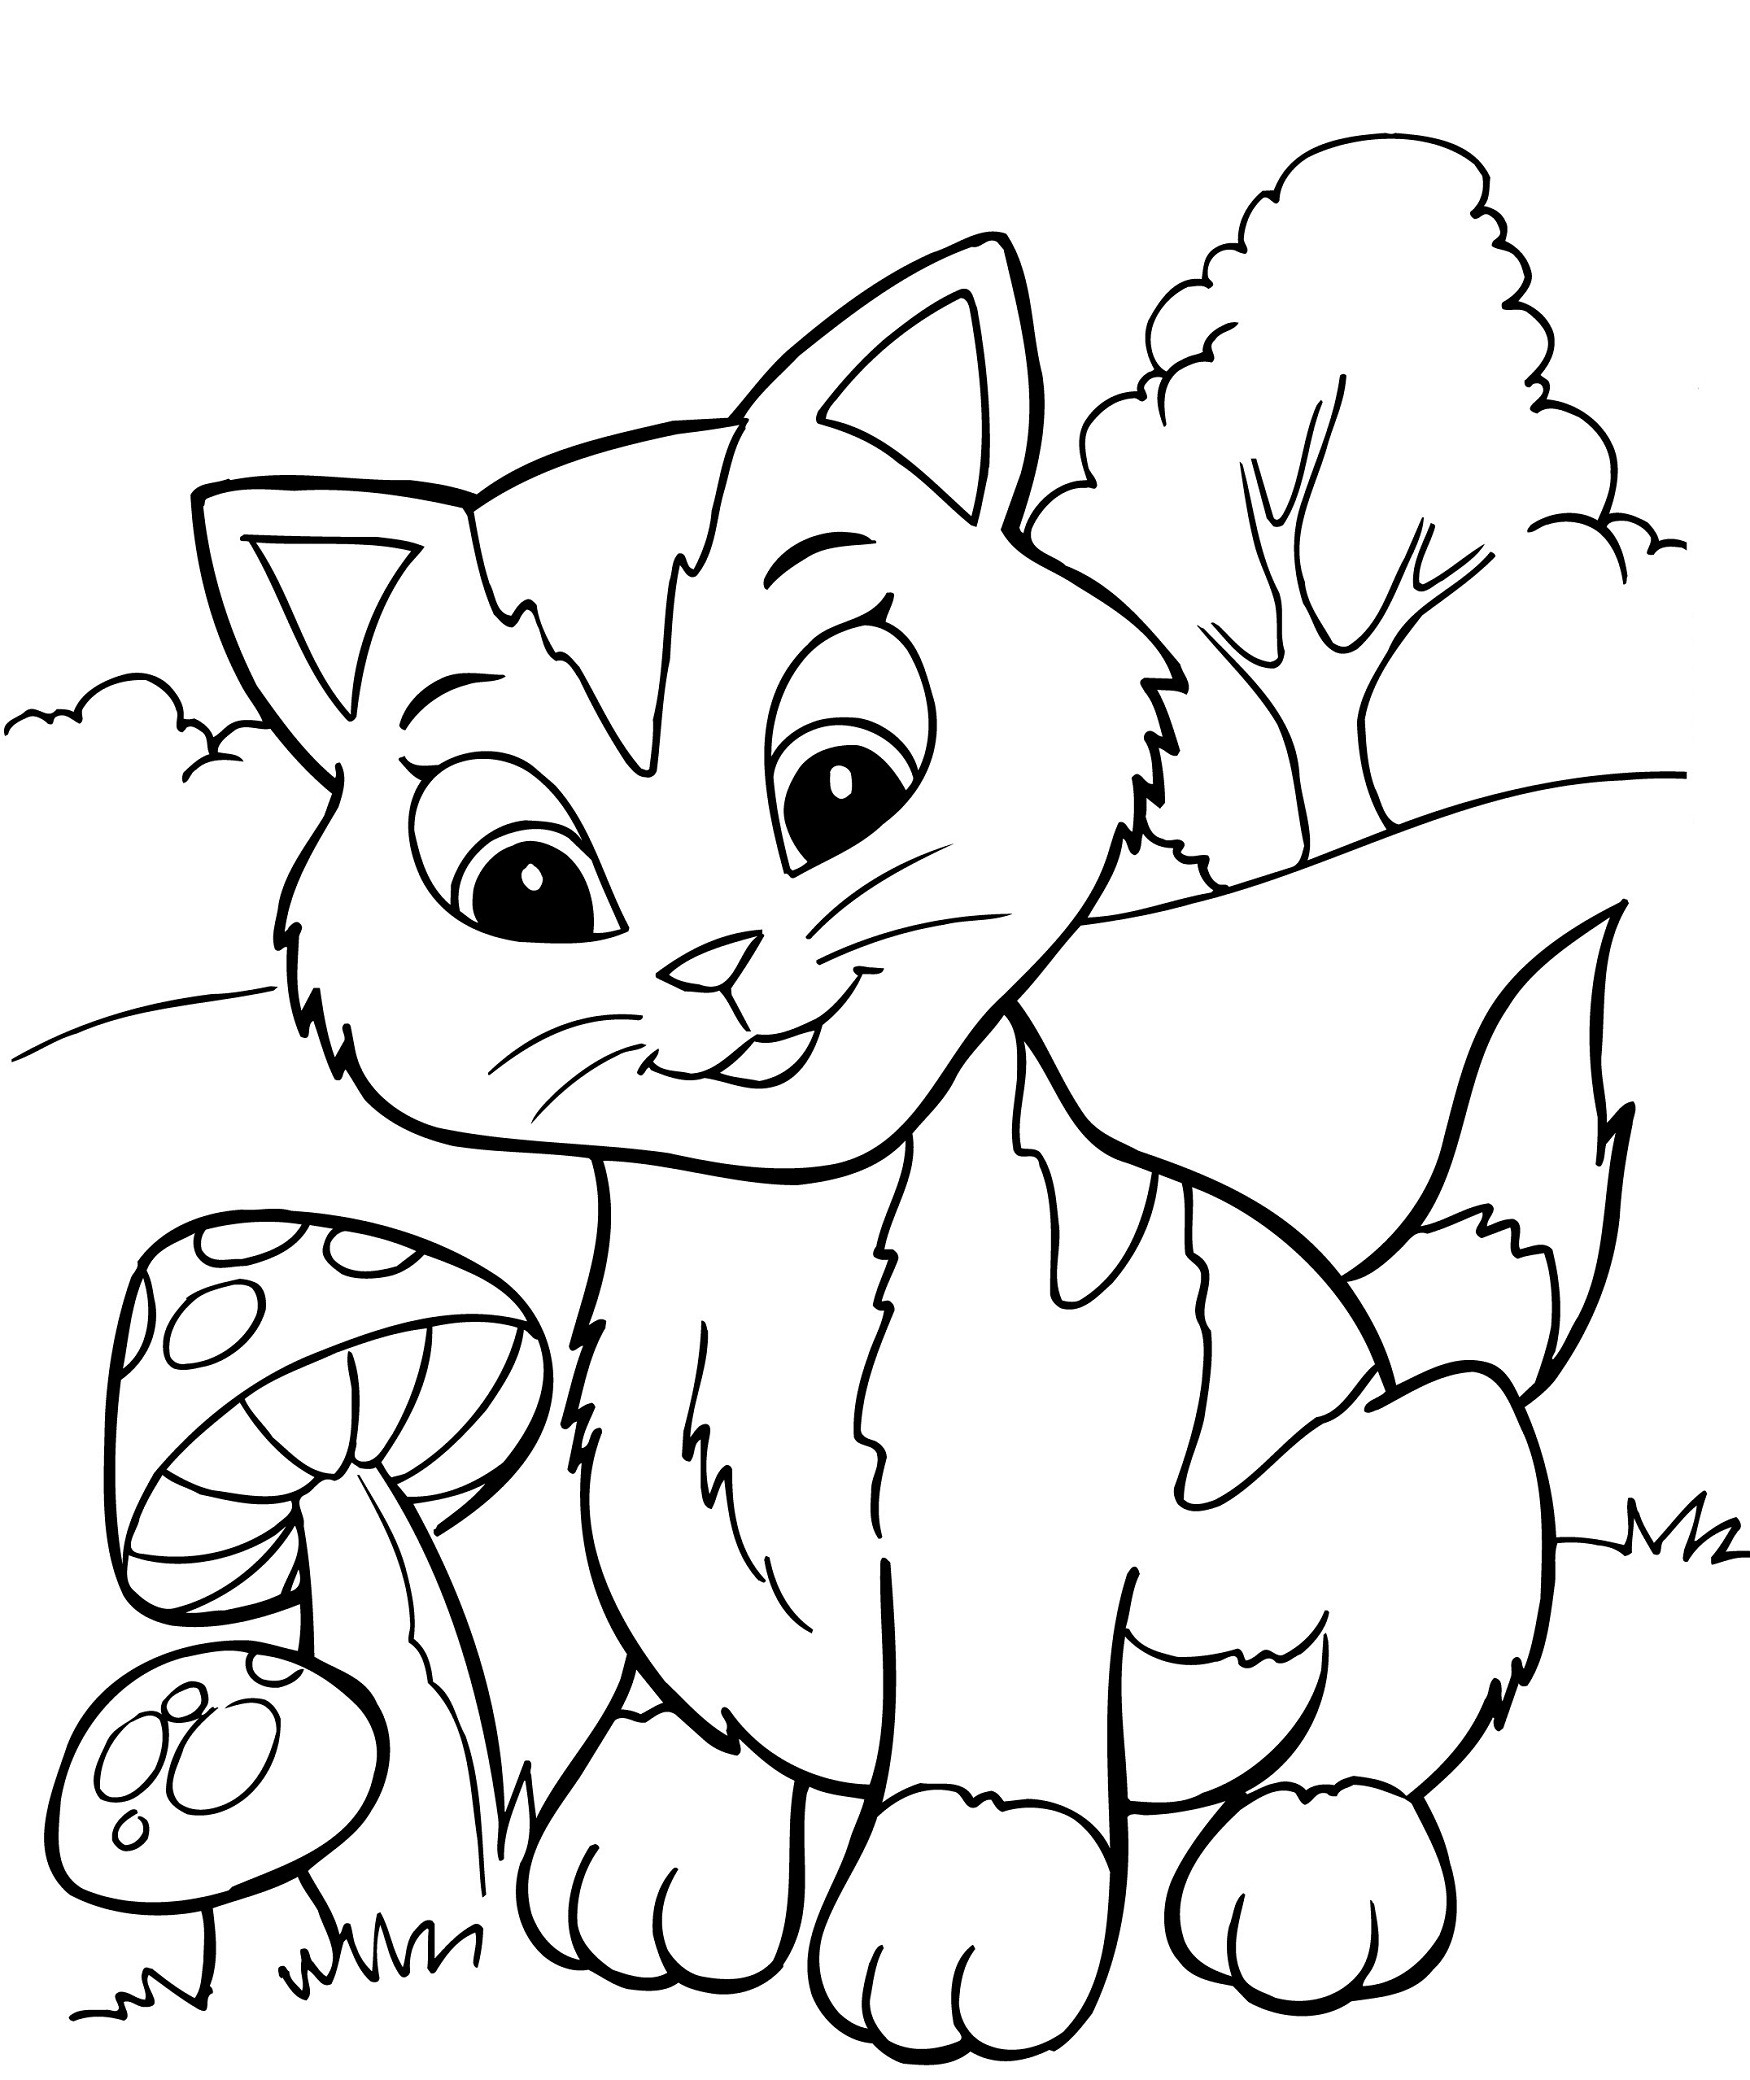 Coloring Pages For Kids Cat
 Free Printable Kitten Coloring Pages For Kids Best